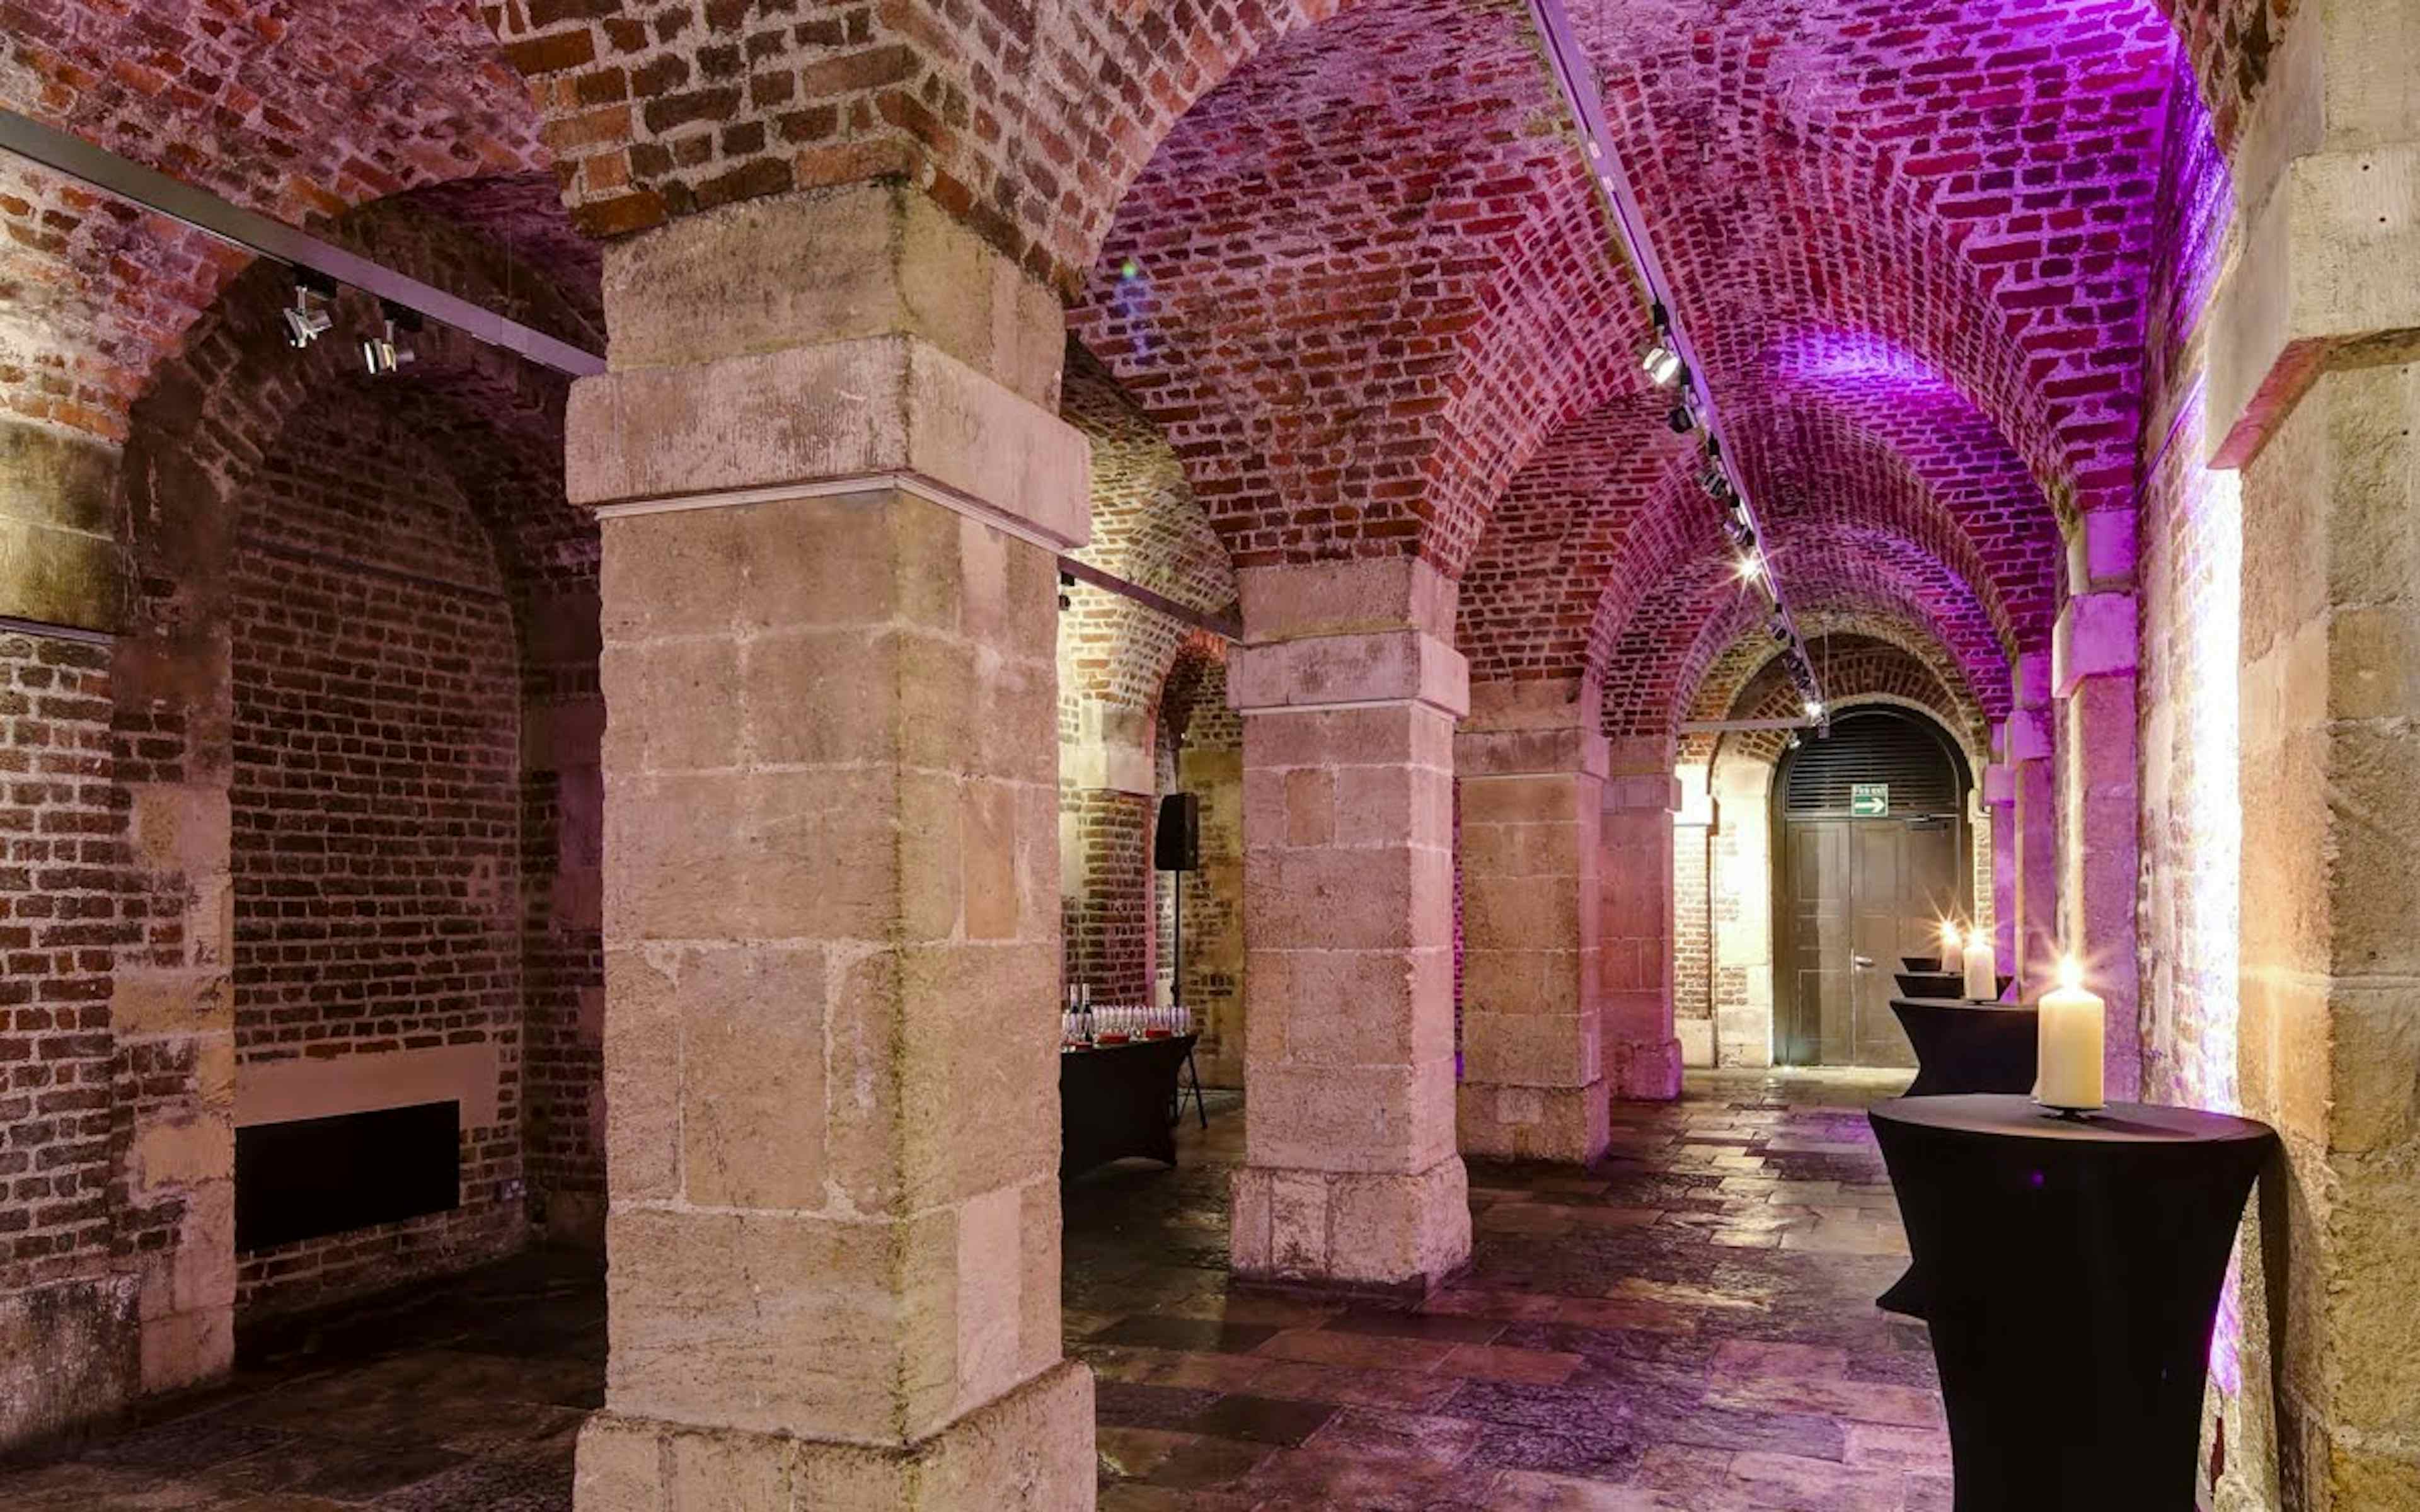 The Gallery in the Crypt  - image